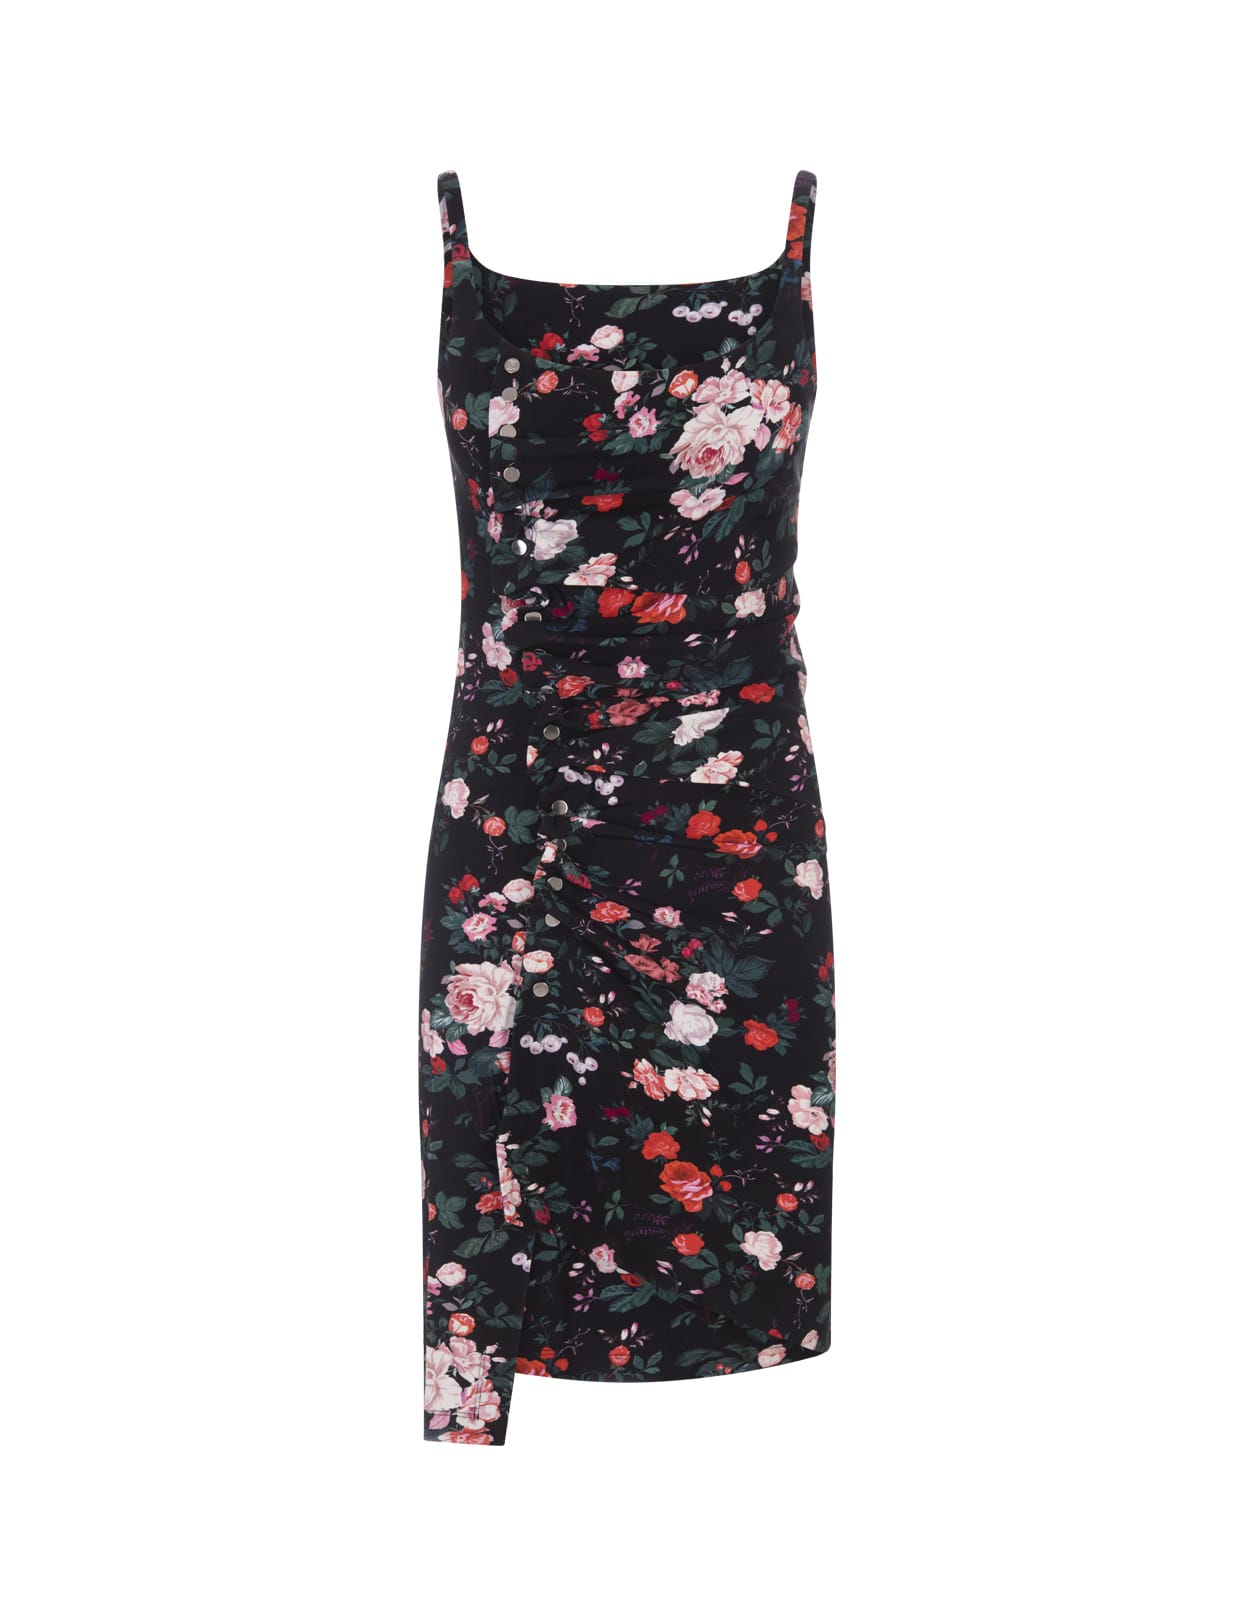 PACO RABANNE BLACK FLORAL MINI DRESS WITH DRAPING